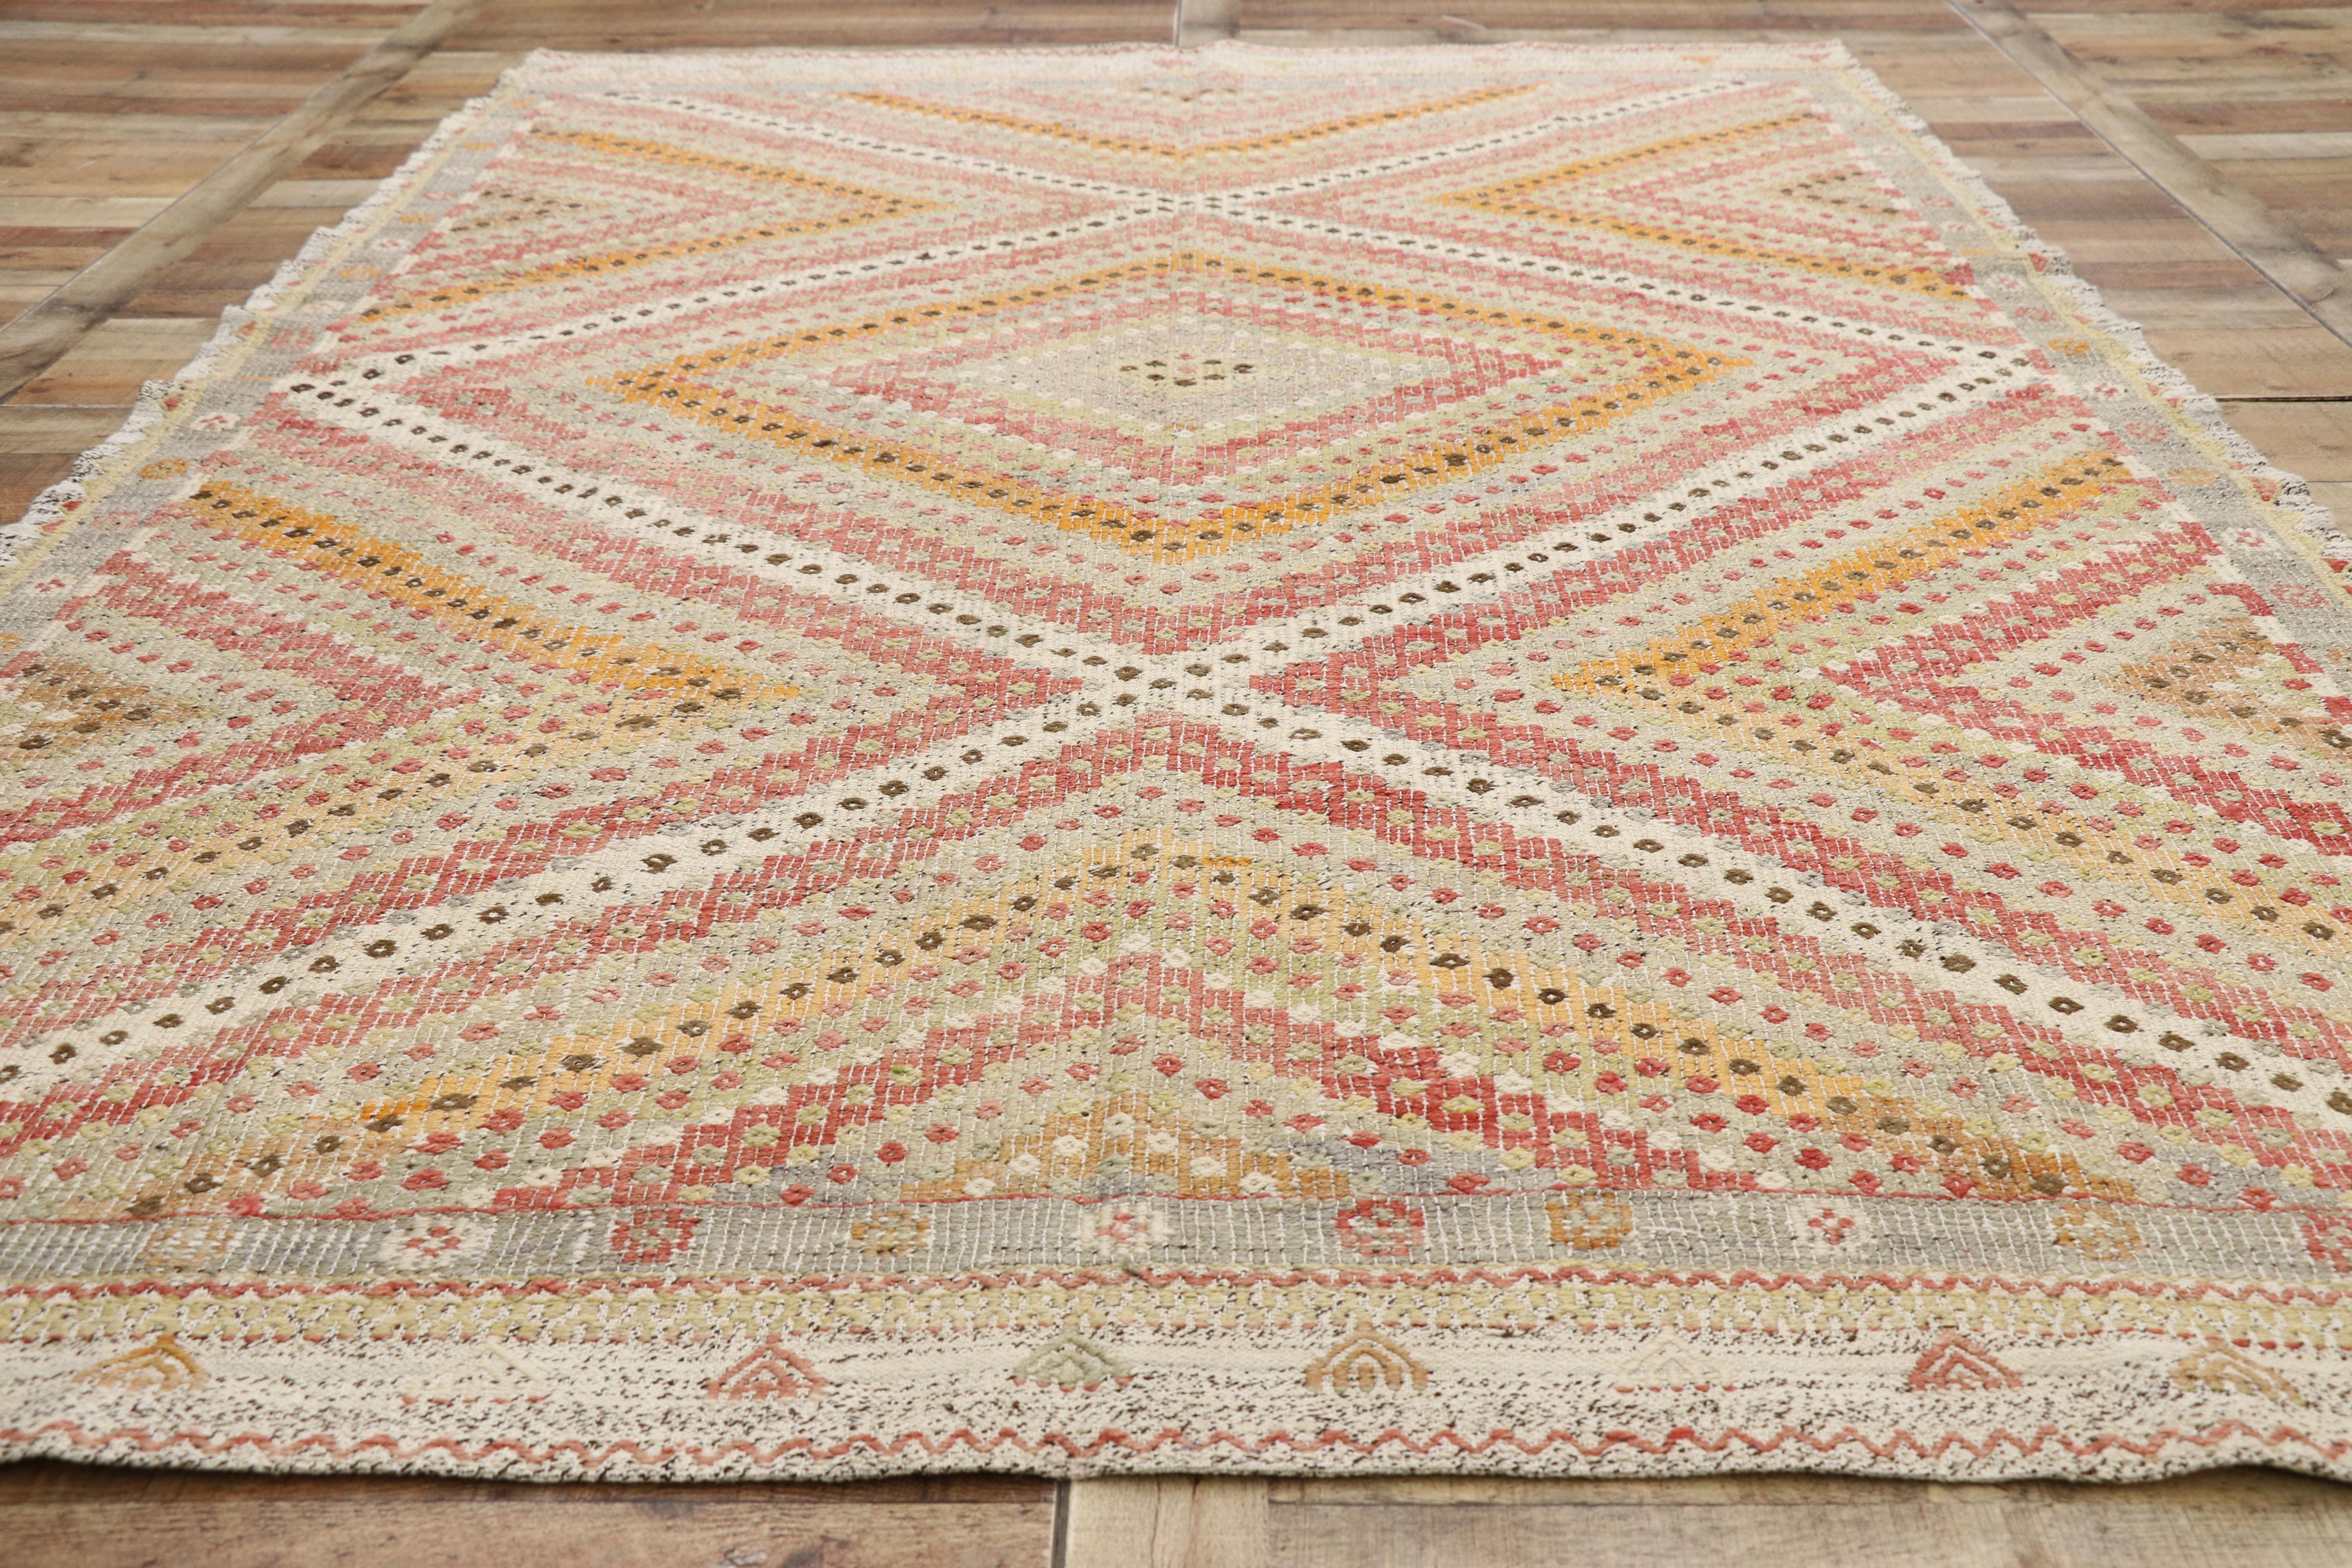 Wool Distressed Vintage Turkish Kilim Rug with Southern Living British Colonial Style For Sale